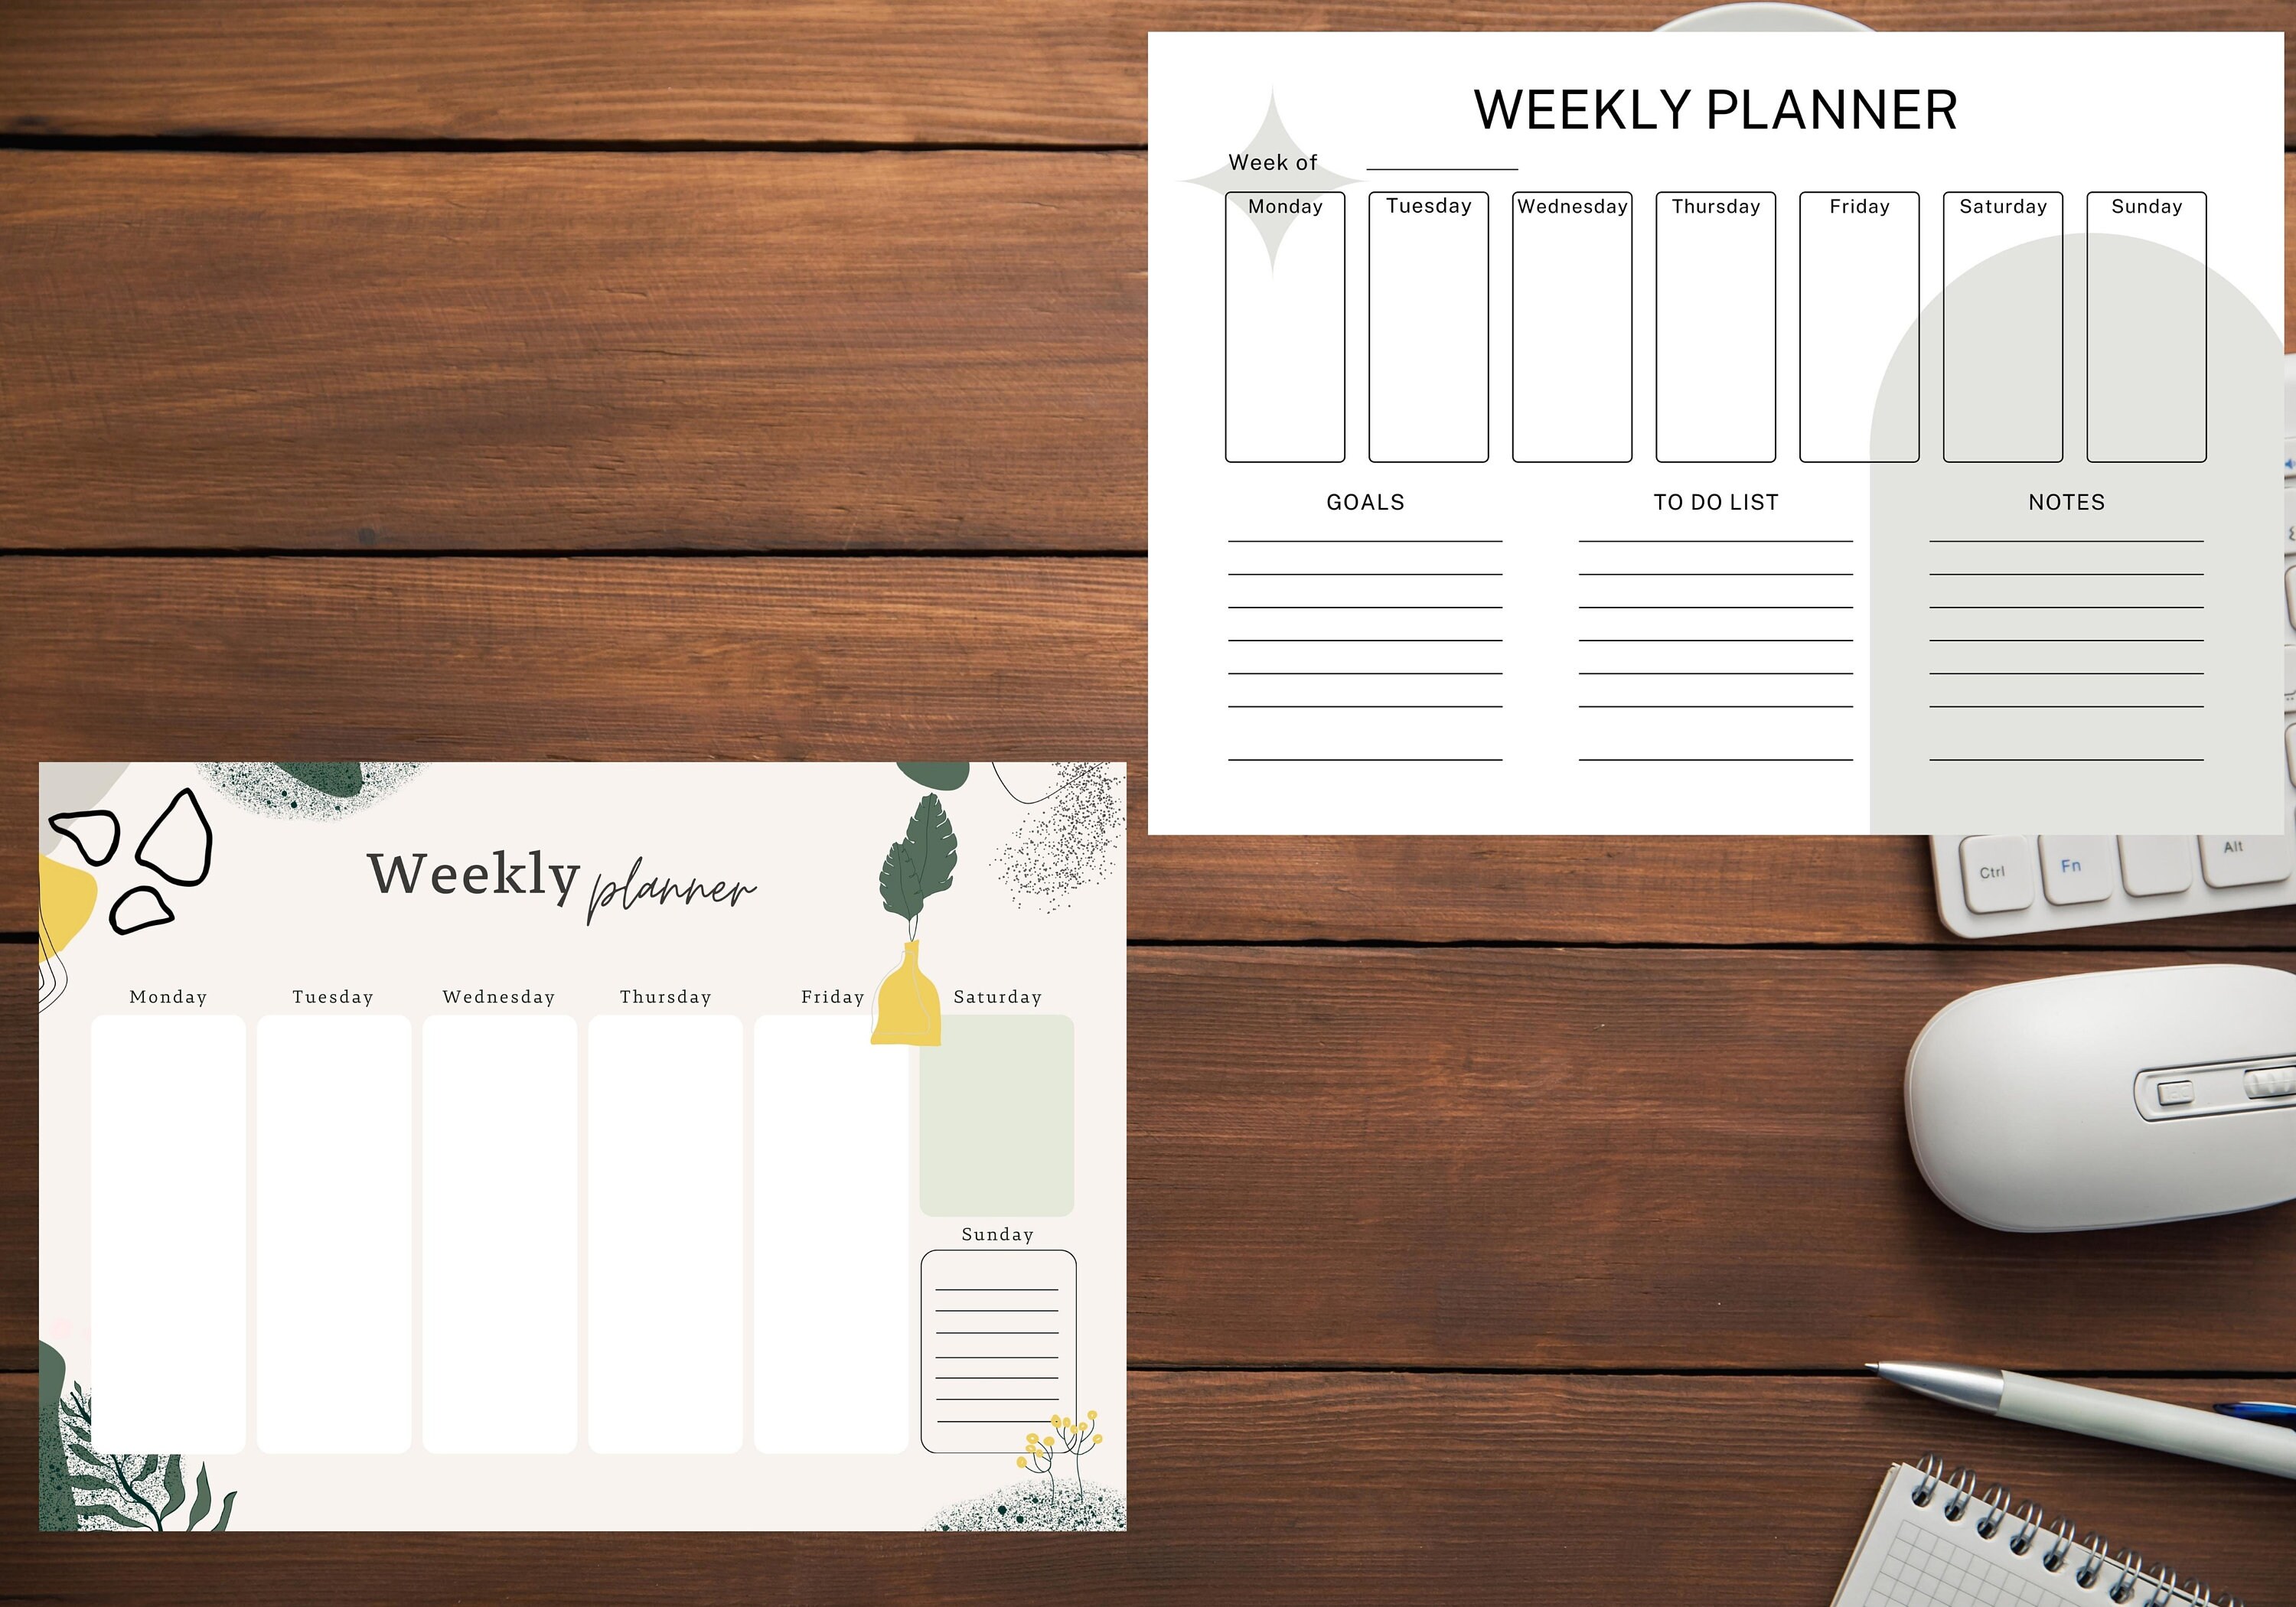 Free Weekly Planners for Microsoft Word - 20+ Templates